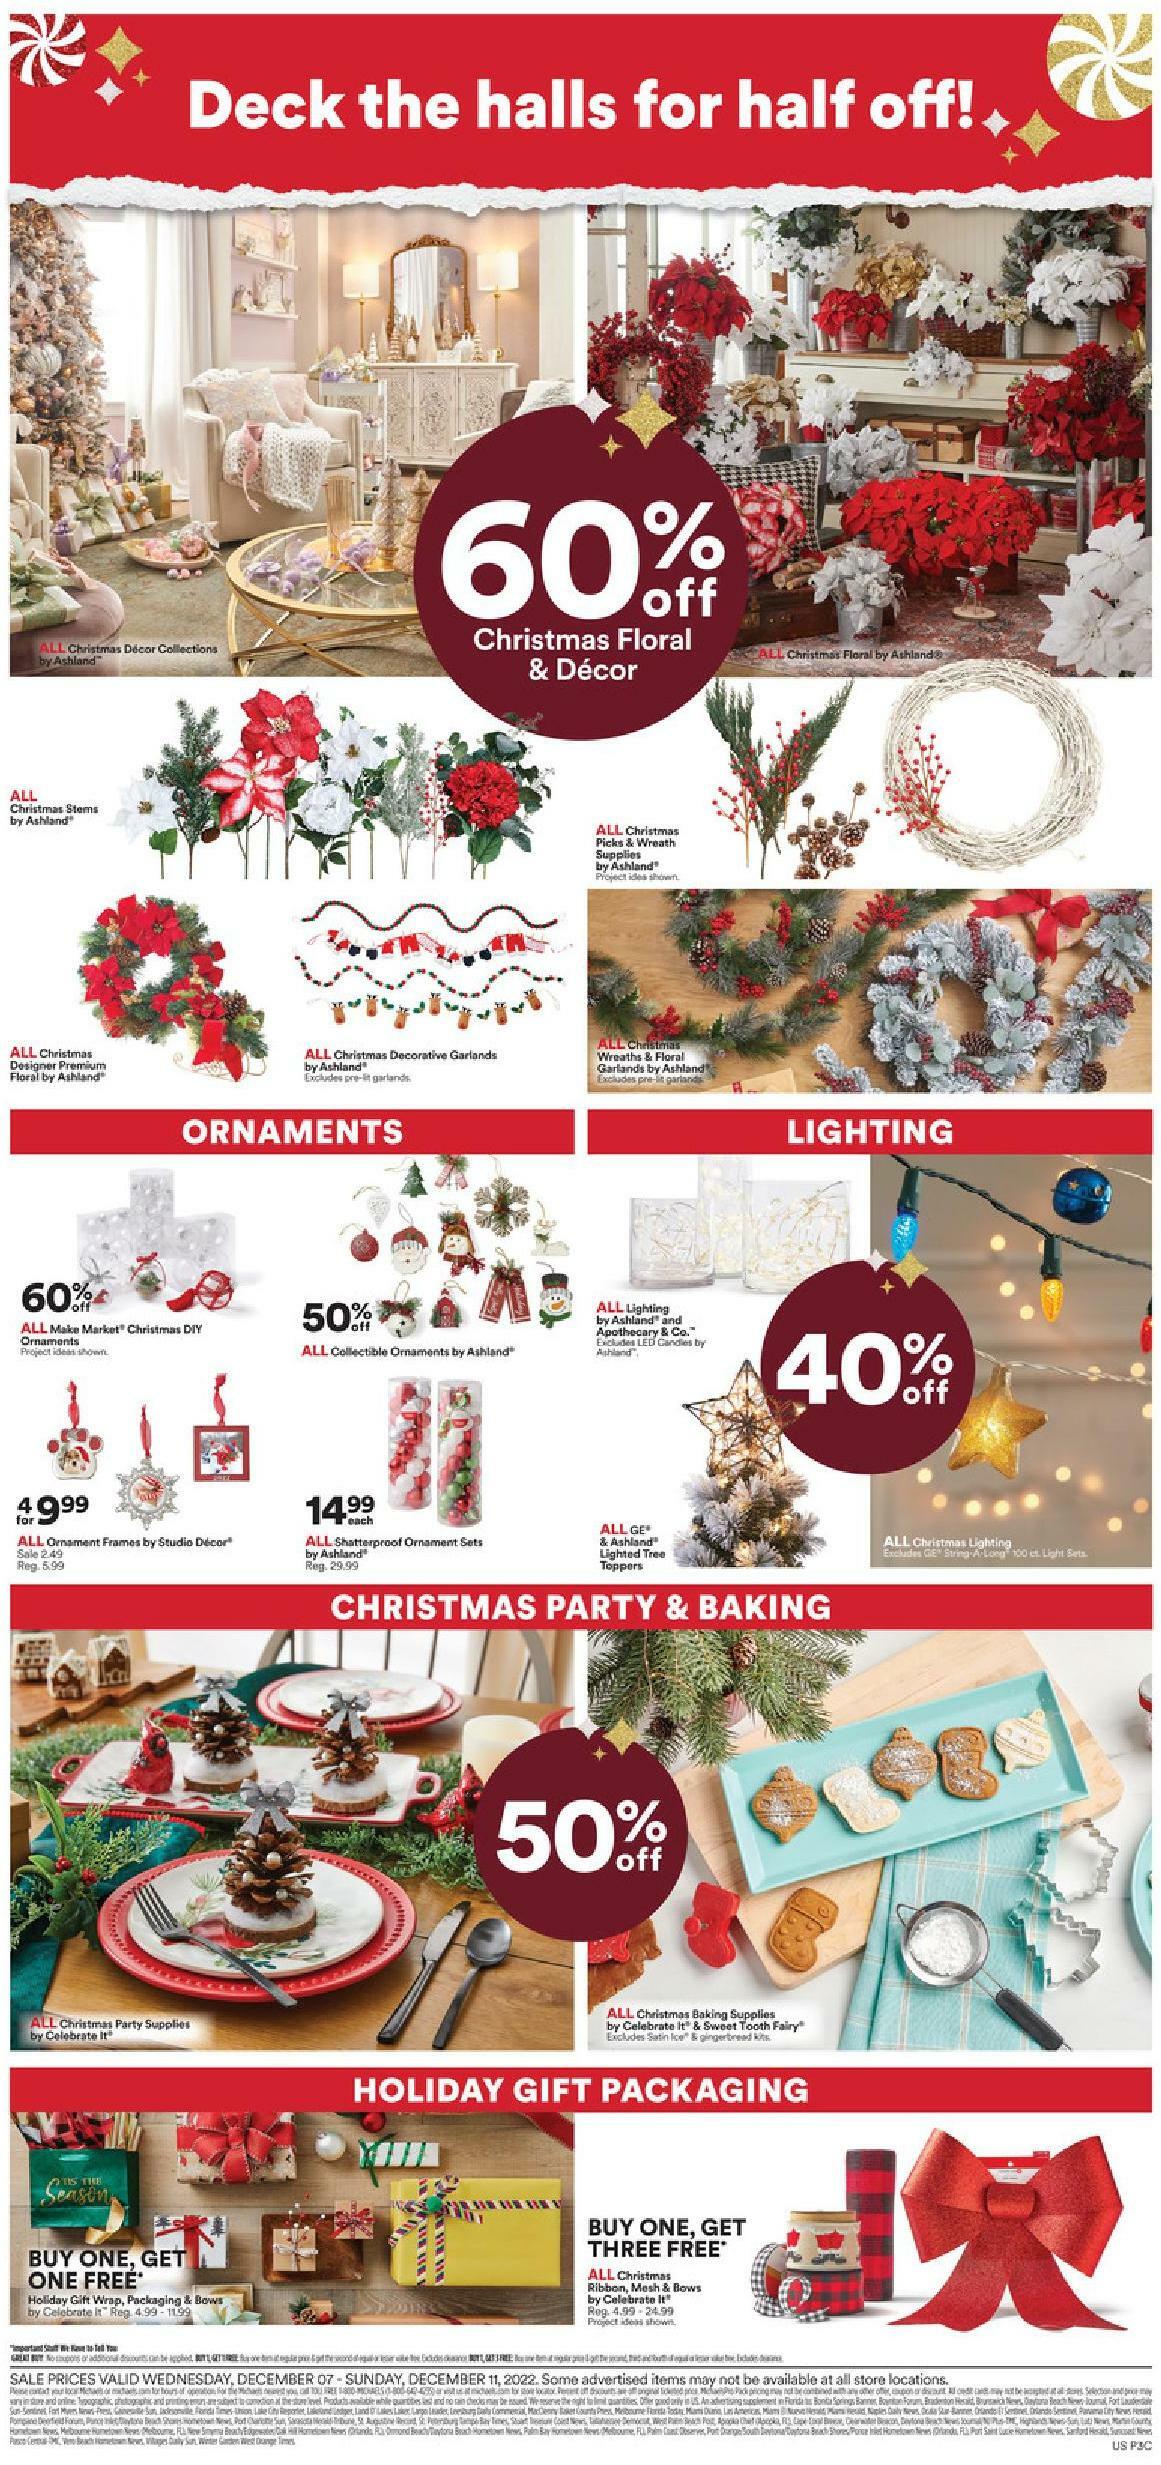 Michaels Weekly Ad from December 7